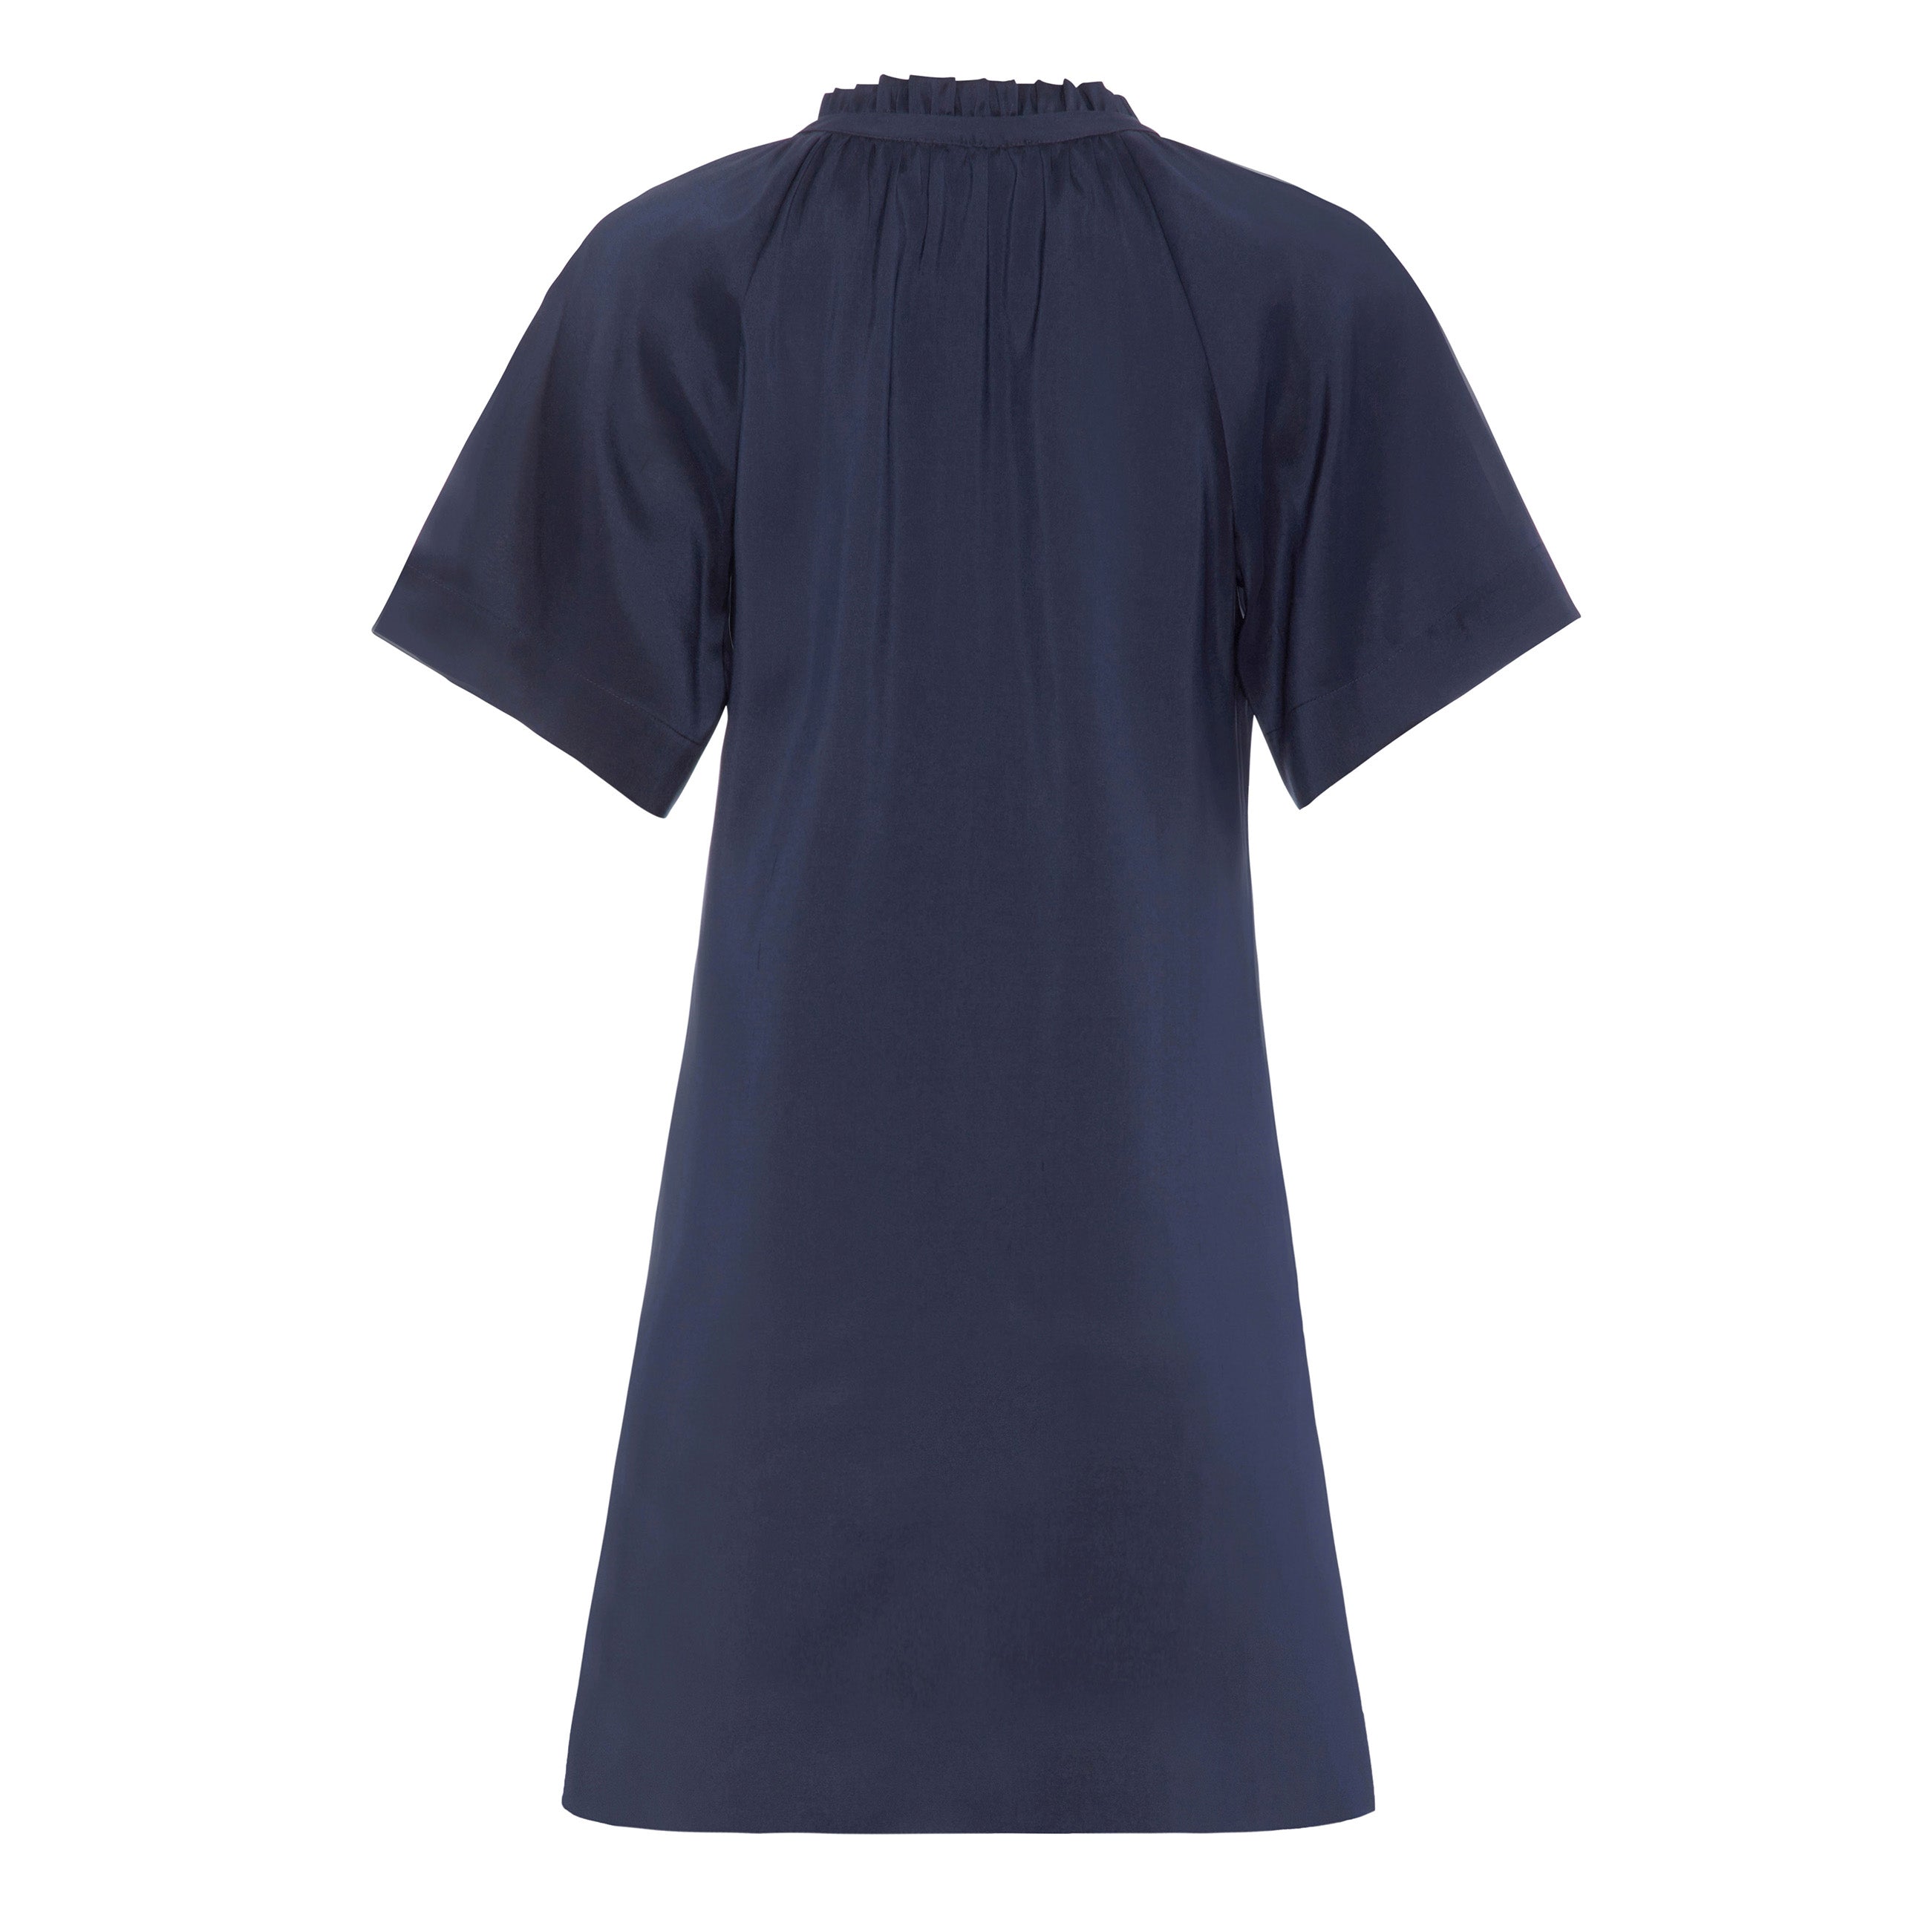 back view of navy short sleeved silk dress with ruffled neck and silhouette cut